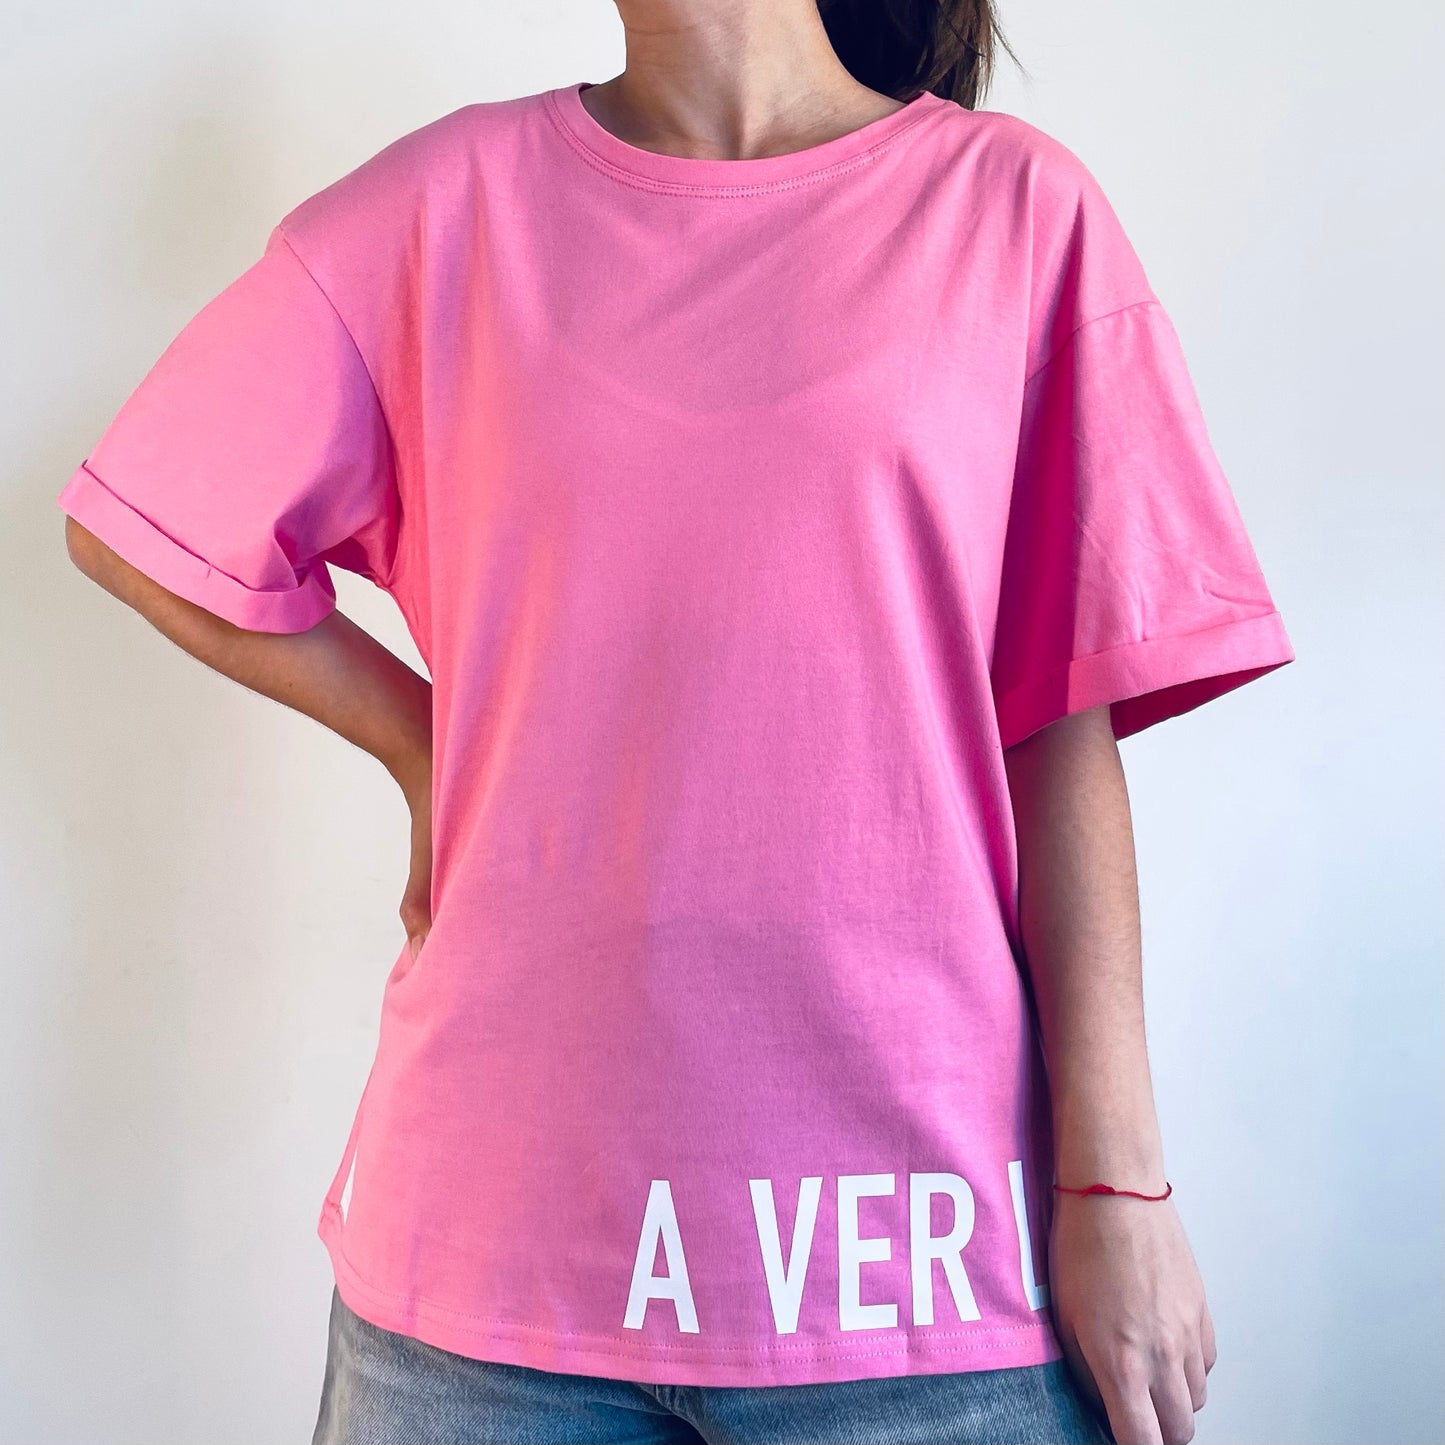 A VER LO QUE SURJA Girls Short sleeve t-shirt one size oversize